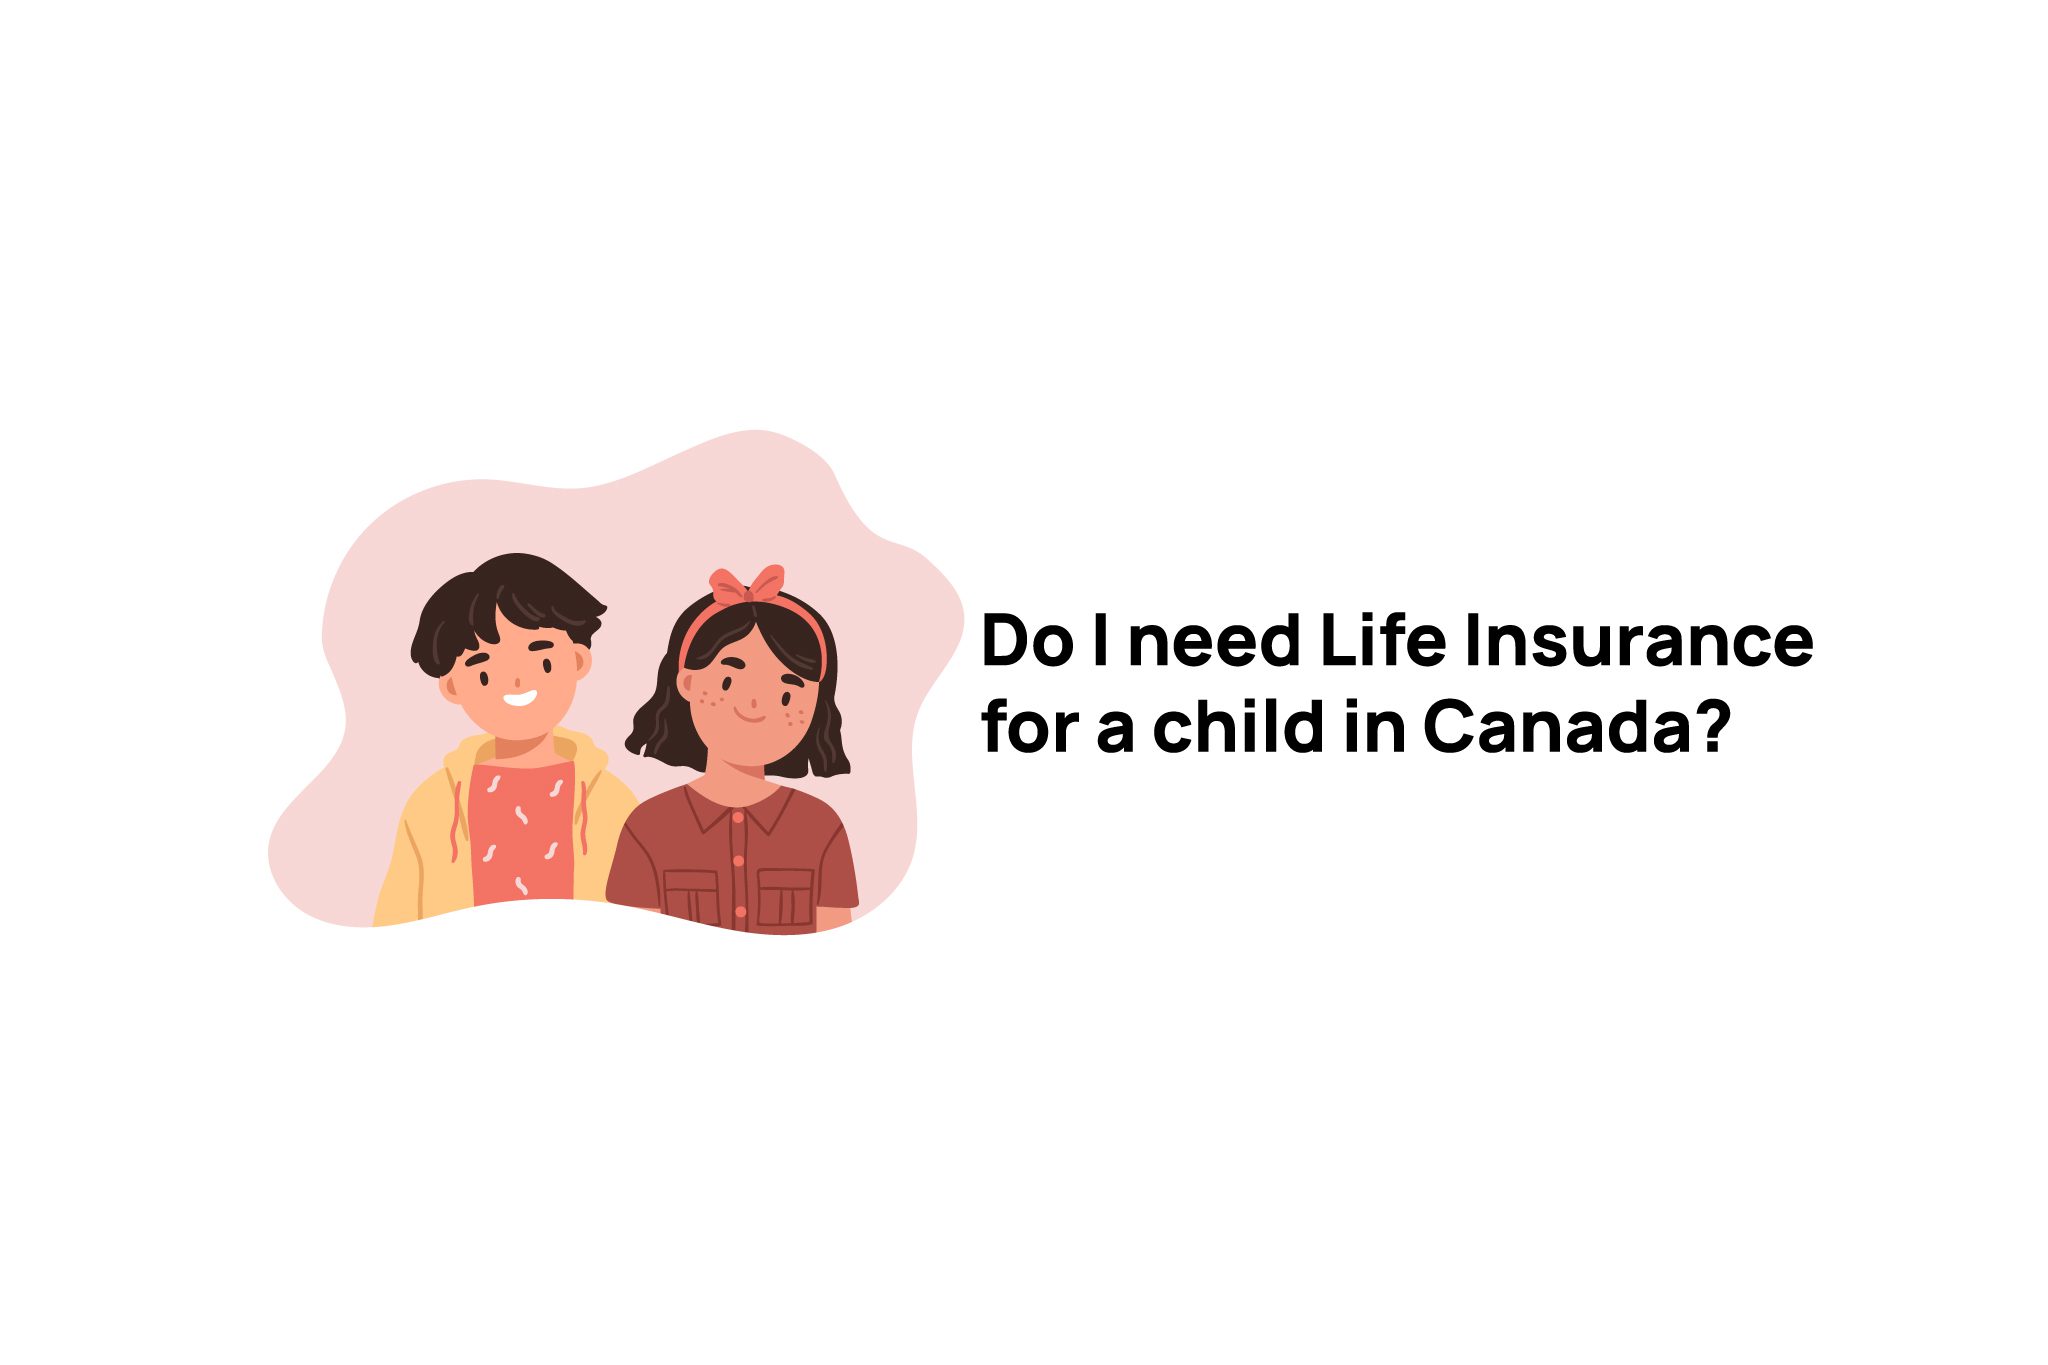 Do I need Life Insurance for a child in Canada?